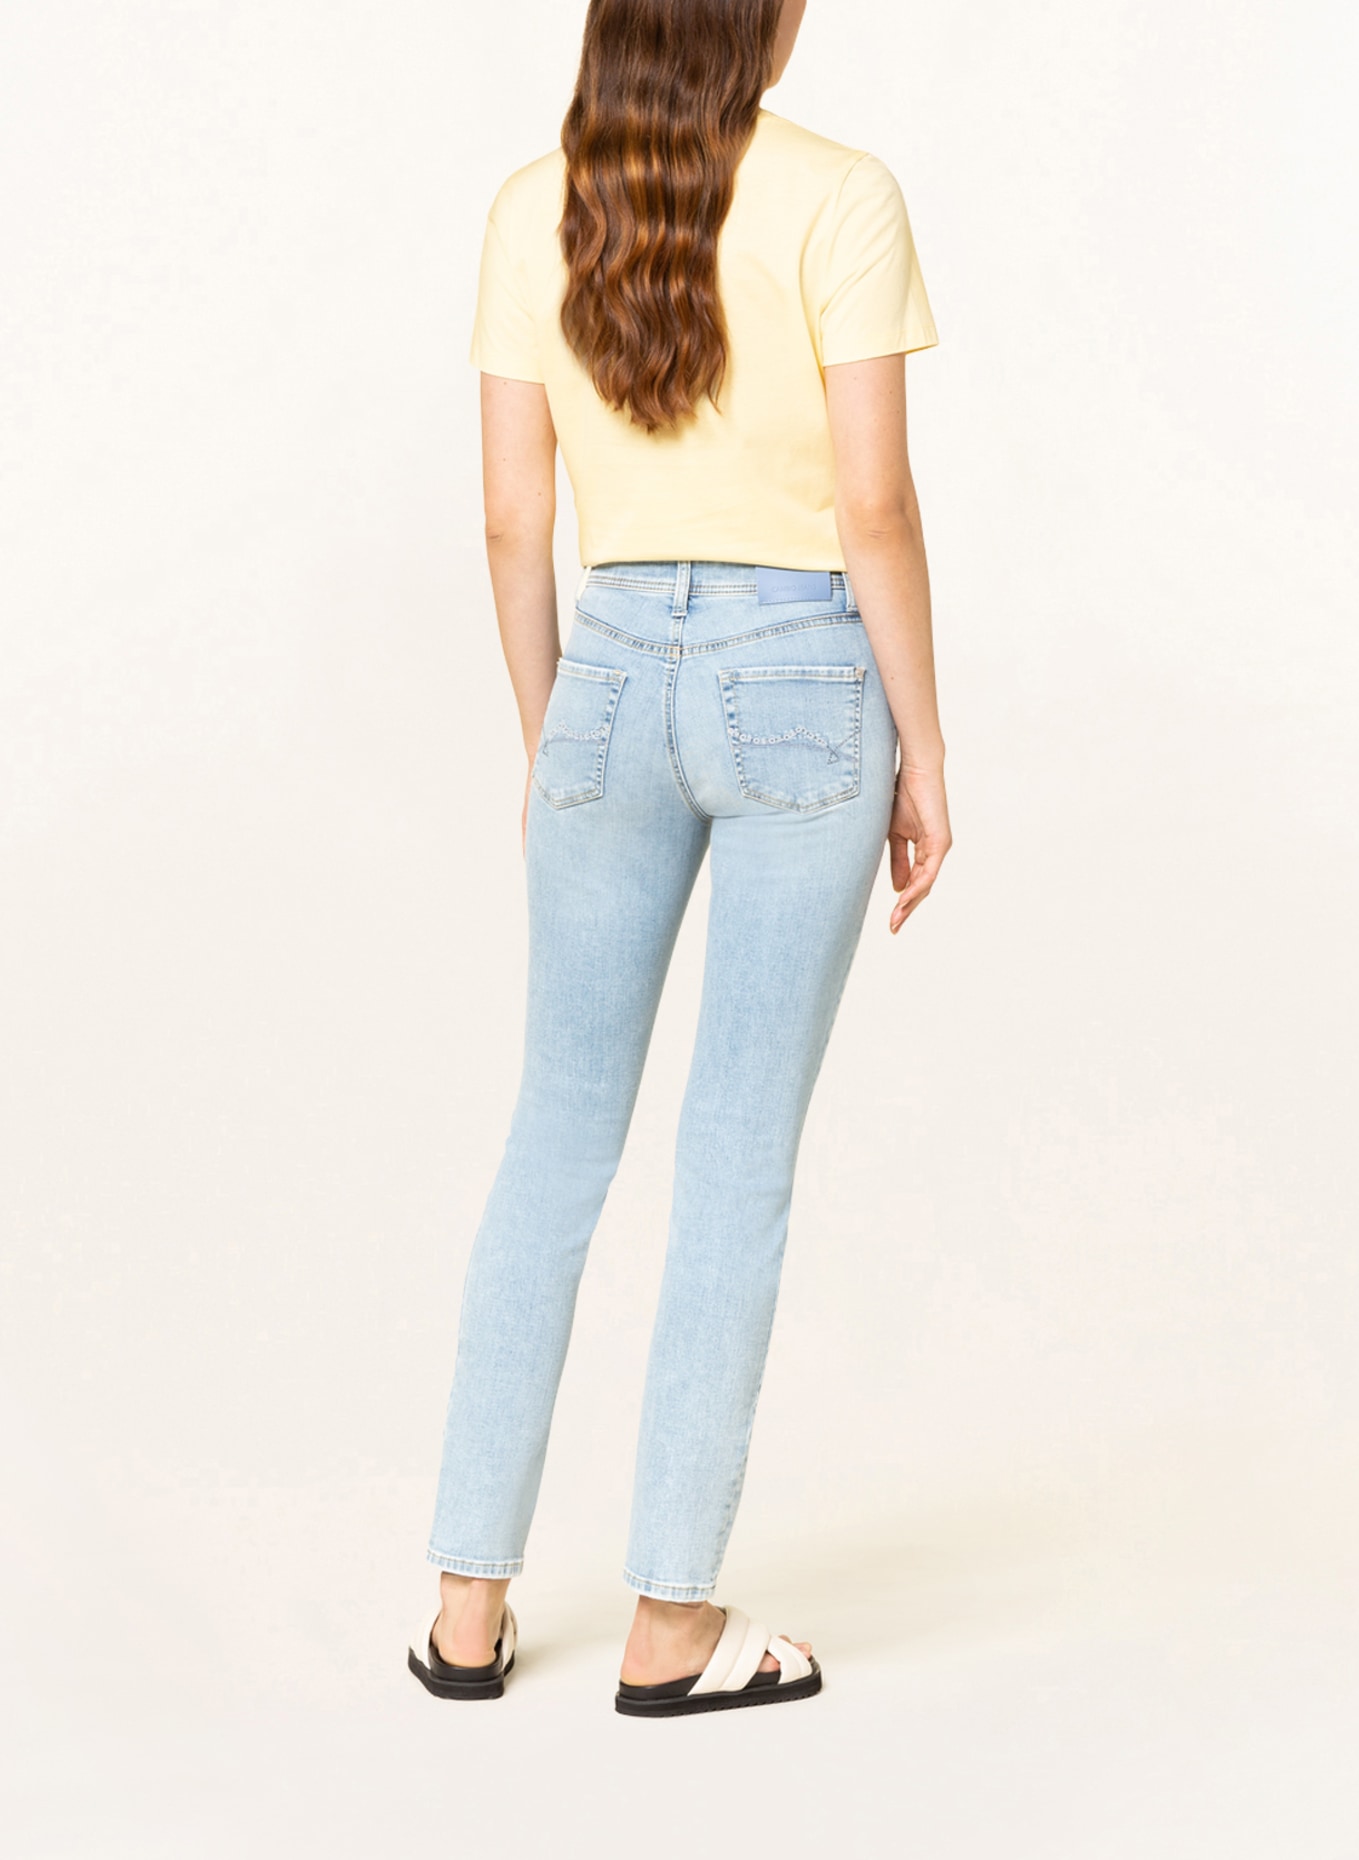 CAMBIO Skinny jeans PARLA, Color: 5325 summer contrast (Image 3)